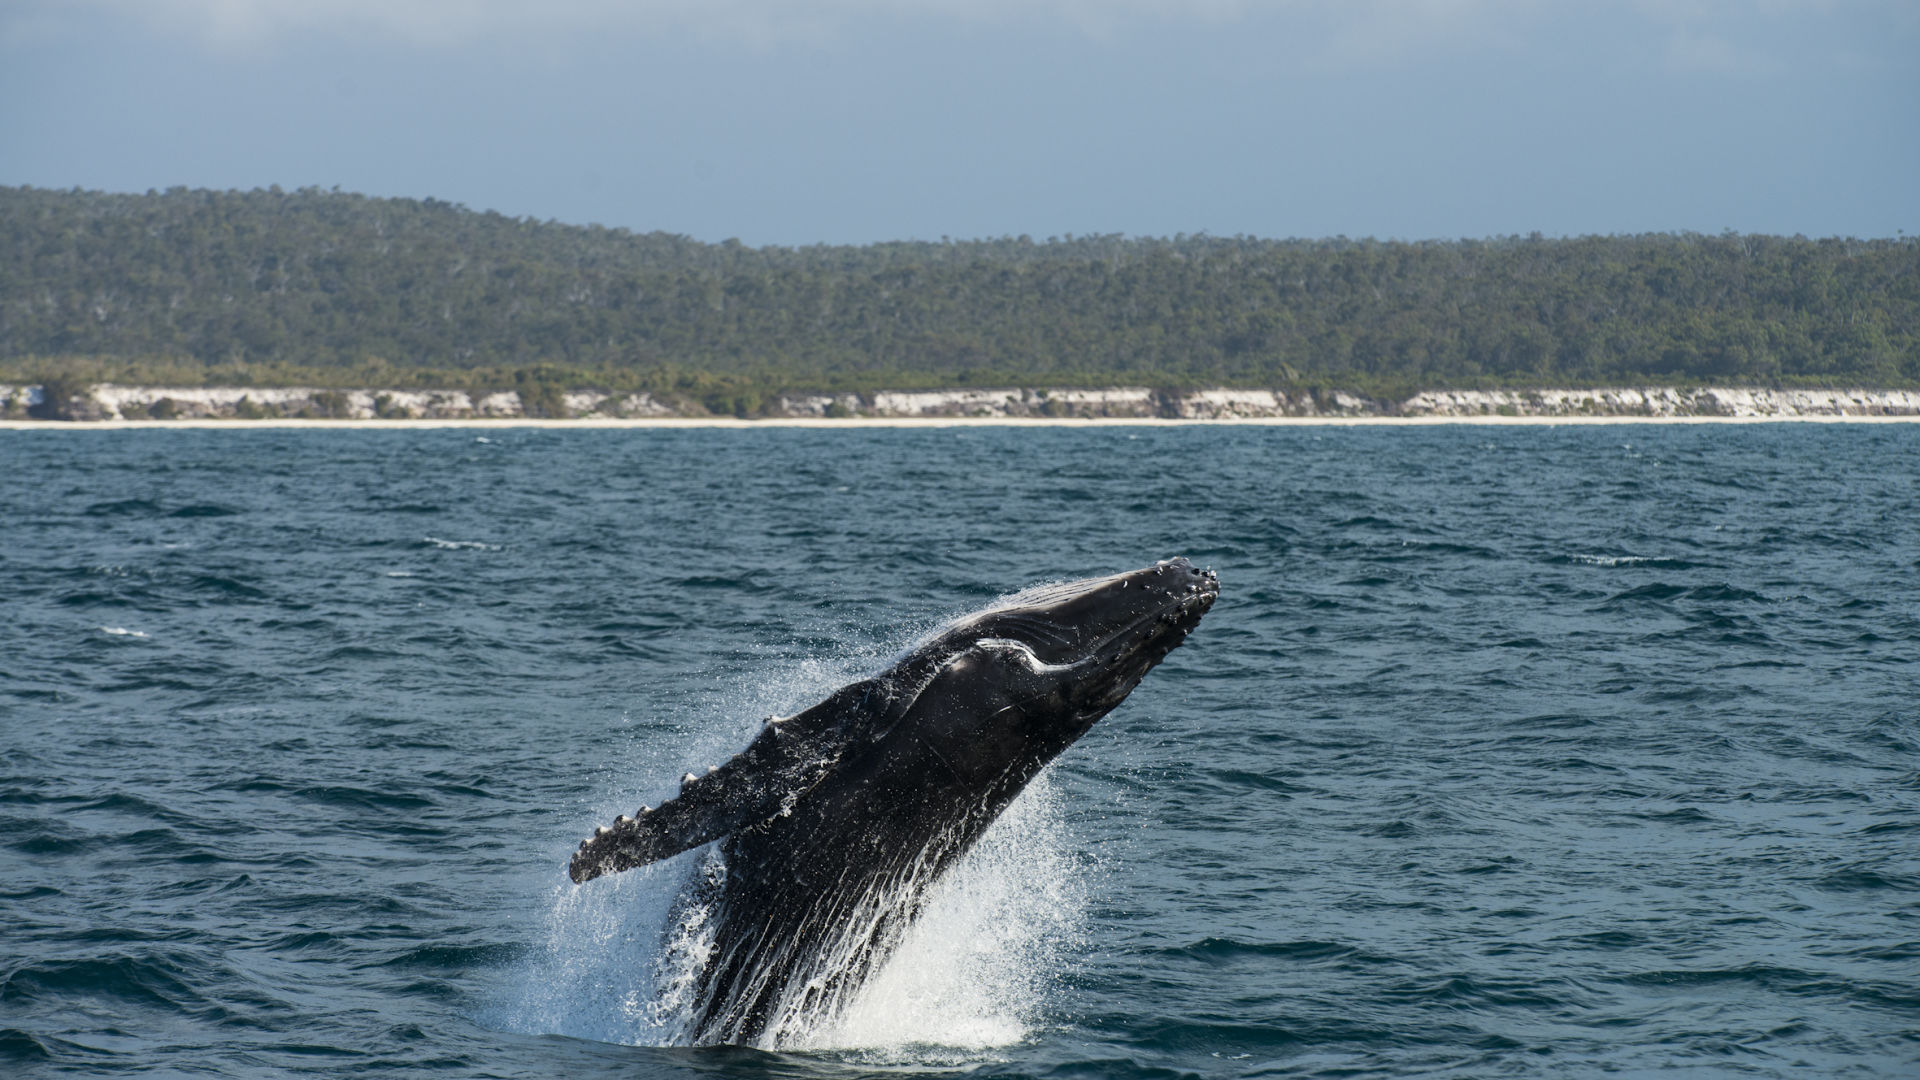 Humpback Whale - Great Barrier Reef Foundation